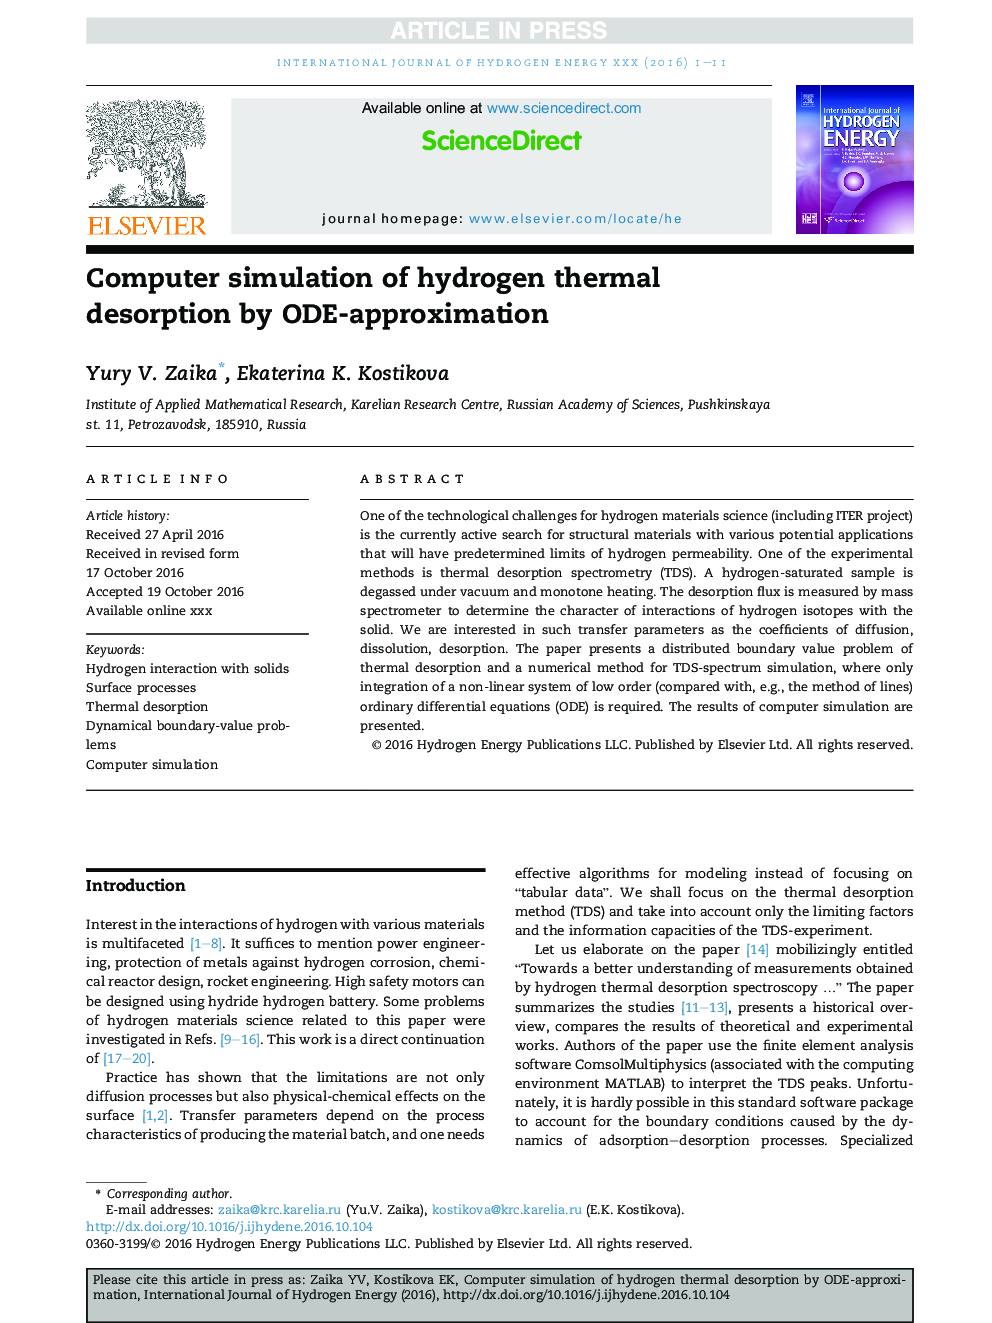 Computer simulation of hydrogen thermal desorption by ODE-approximation